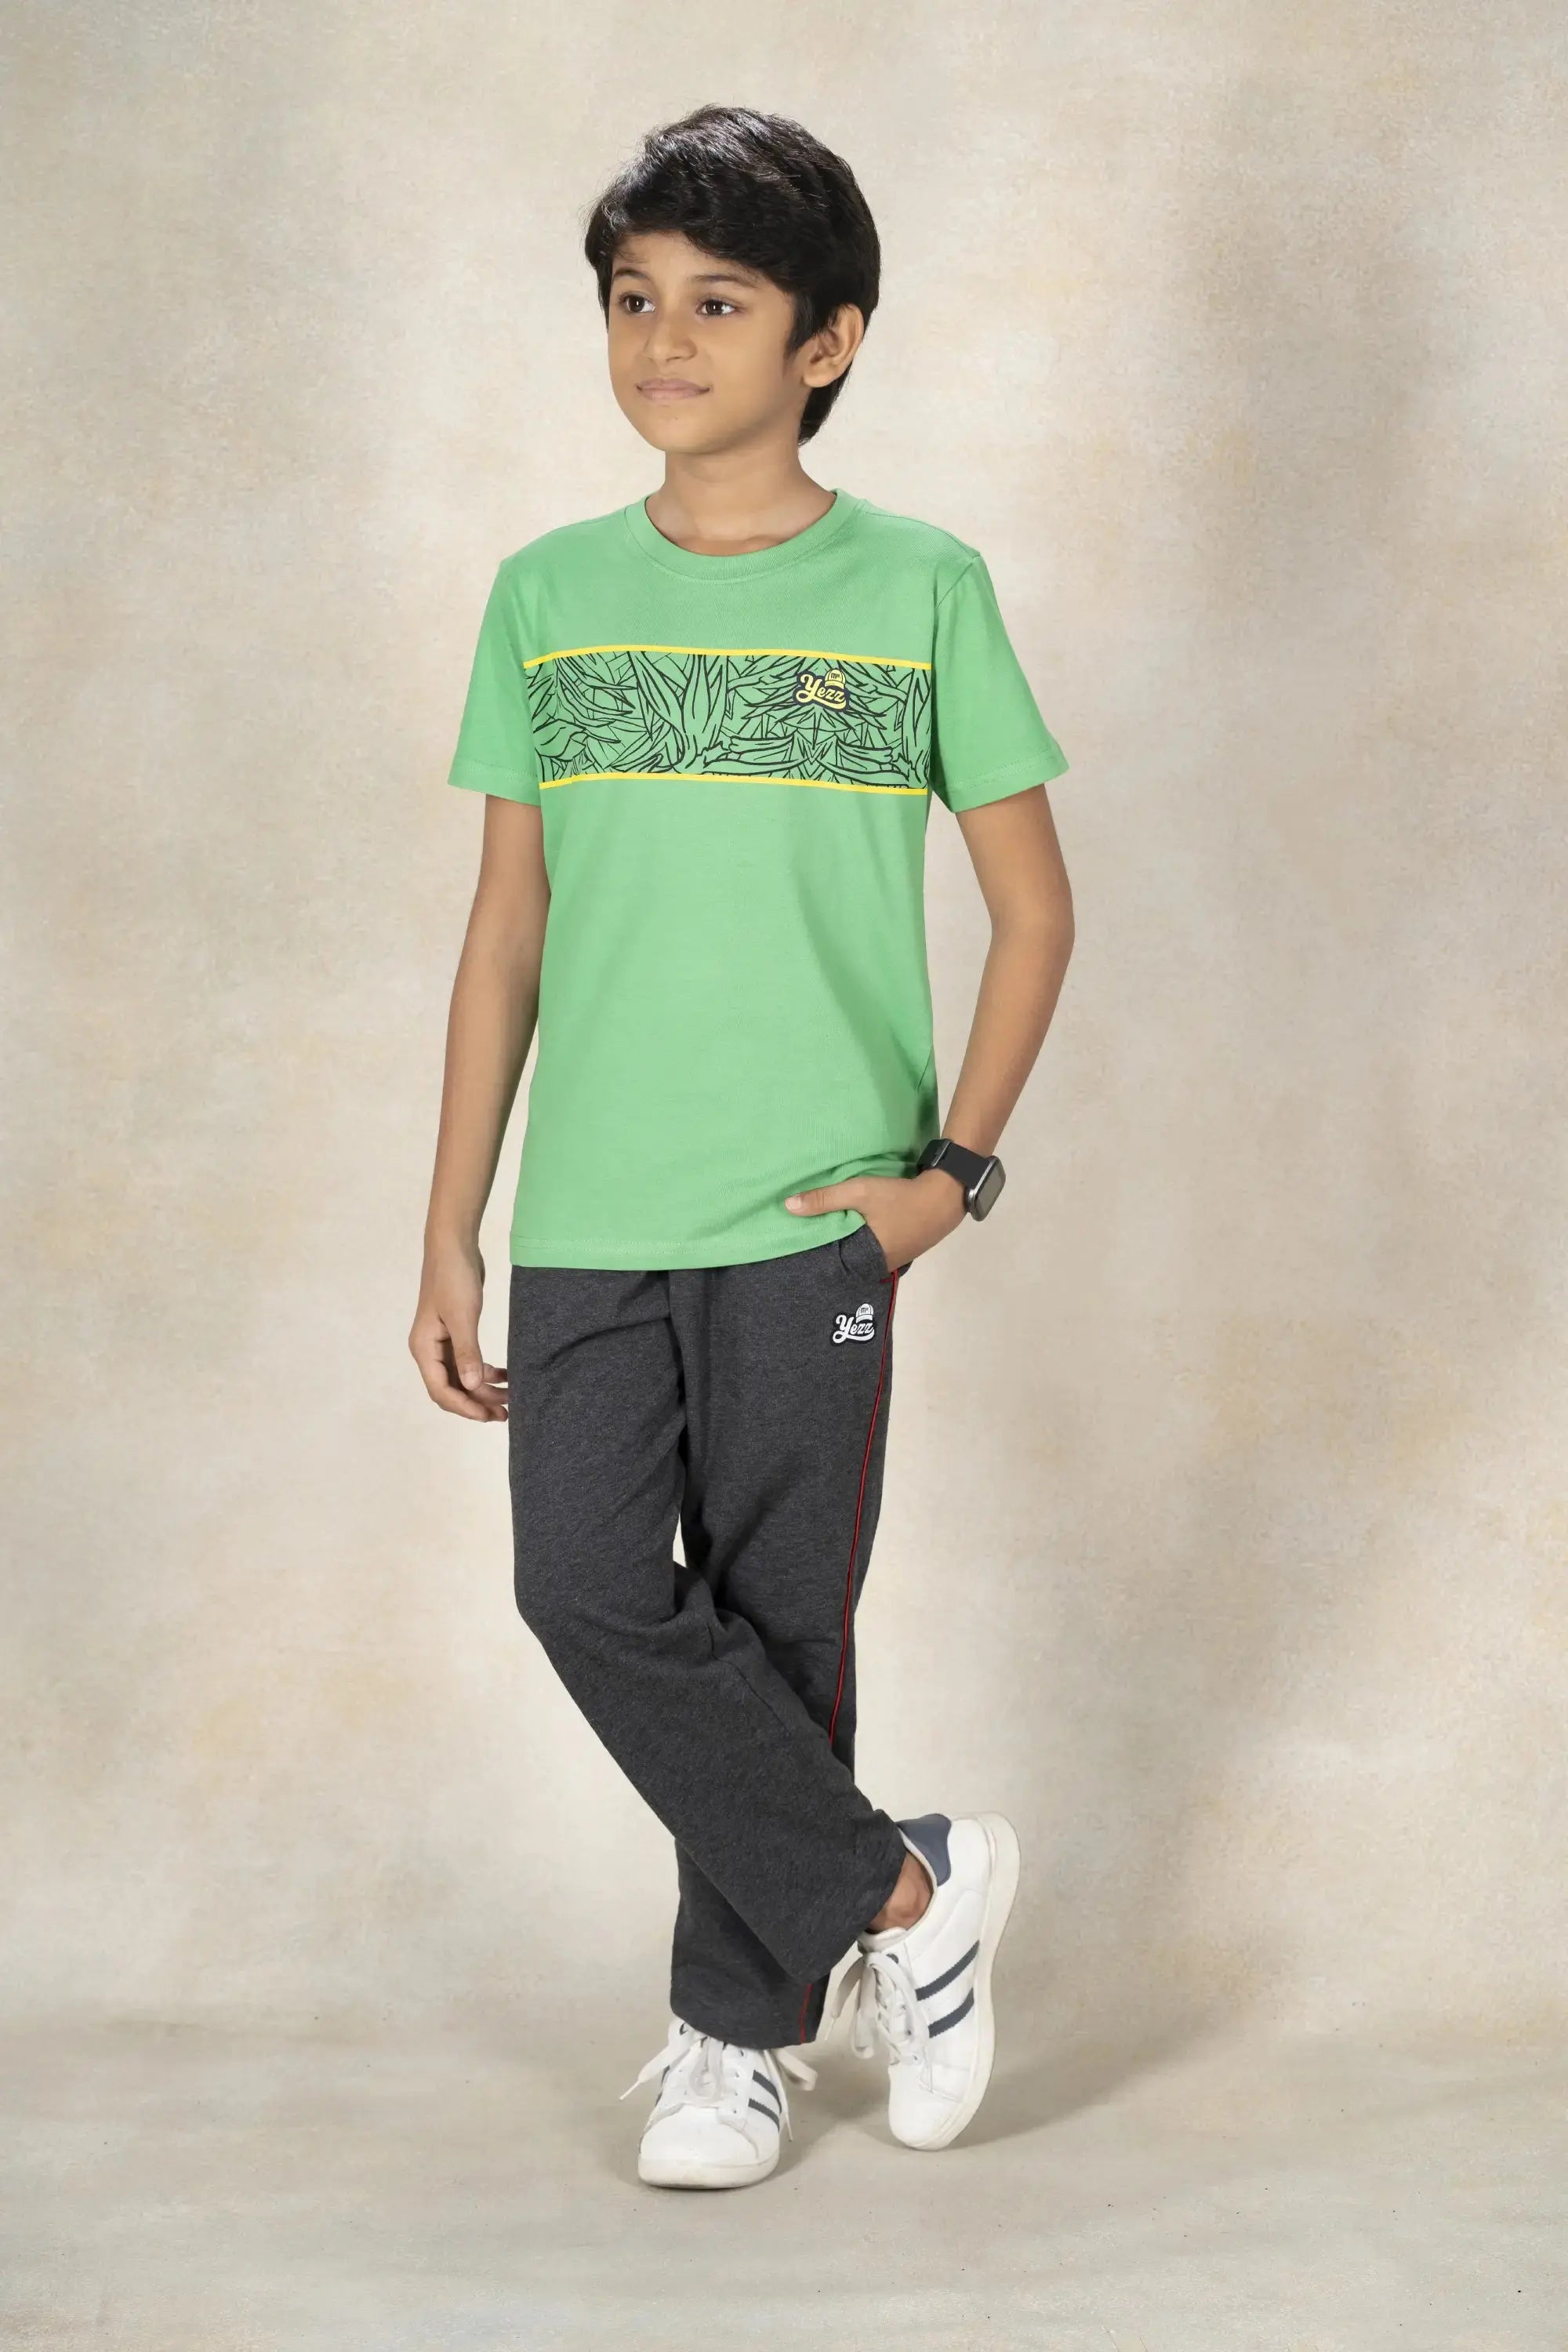 Boys Round Neck Cut and Sew T-Shirt MR YEZZ #color_Green Ivy